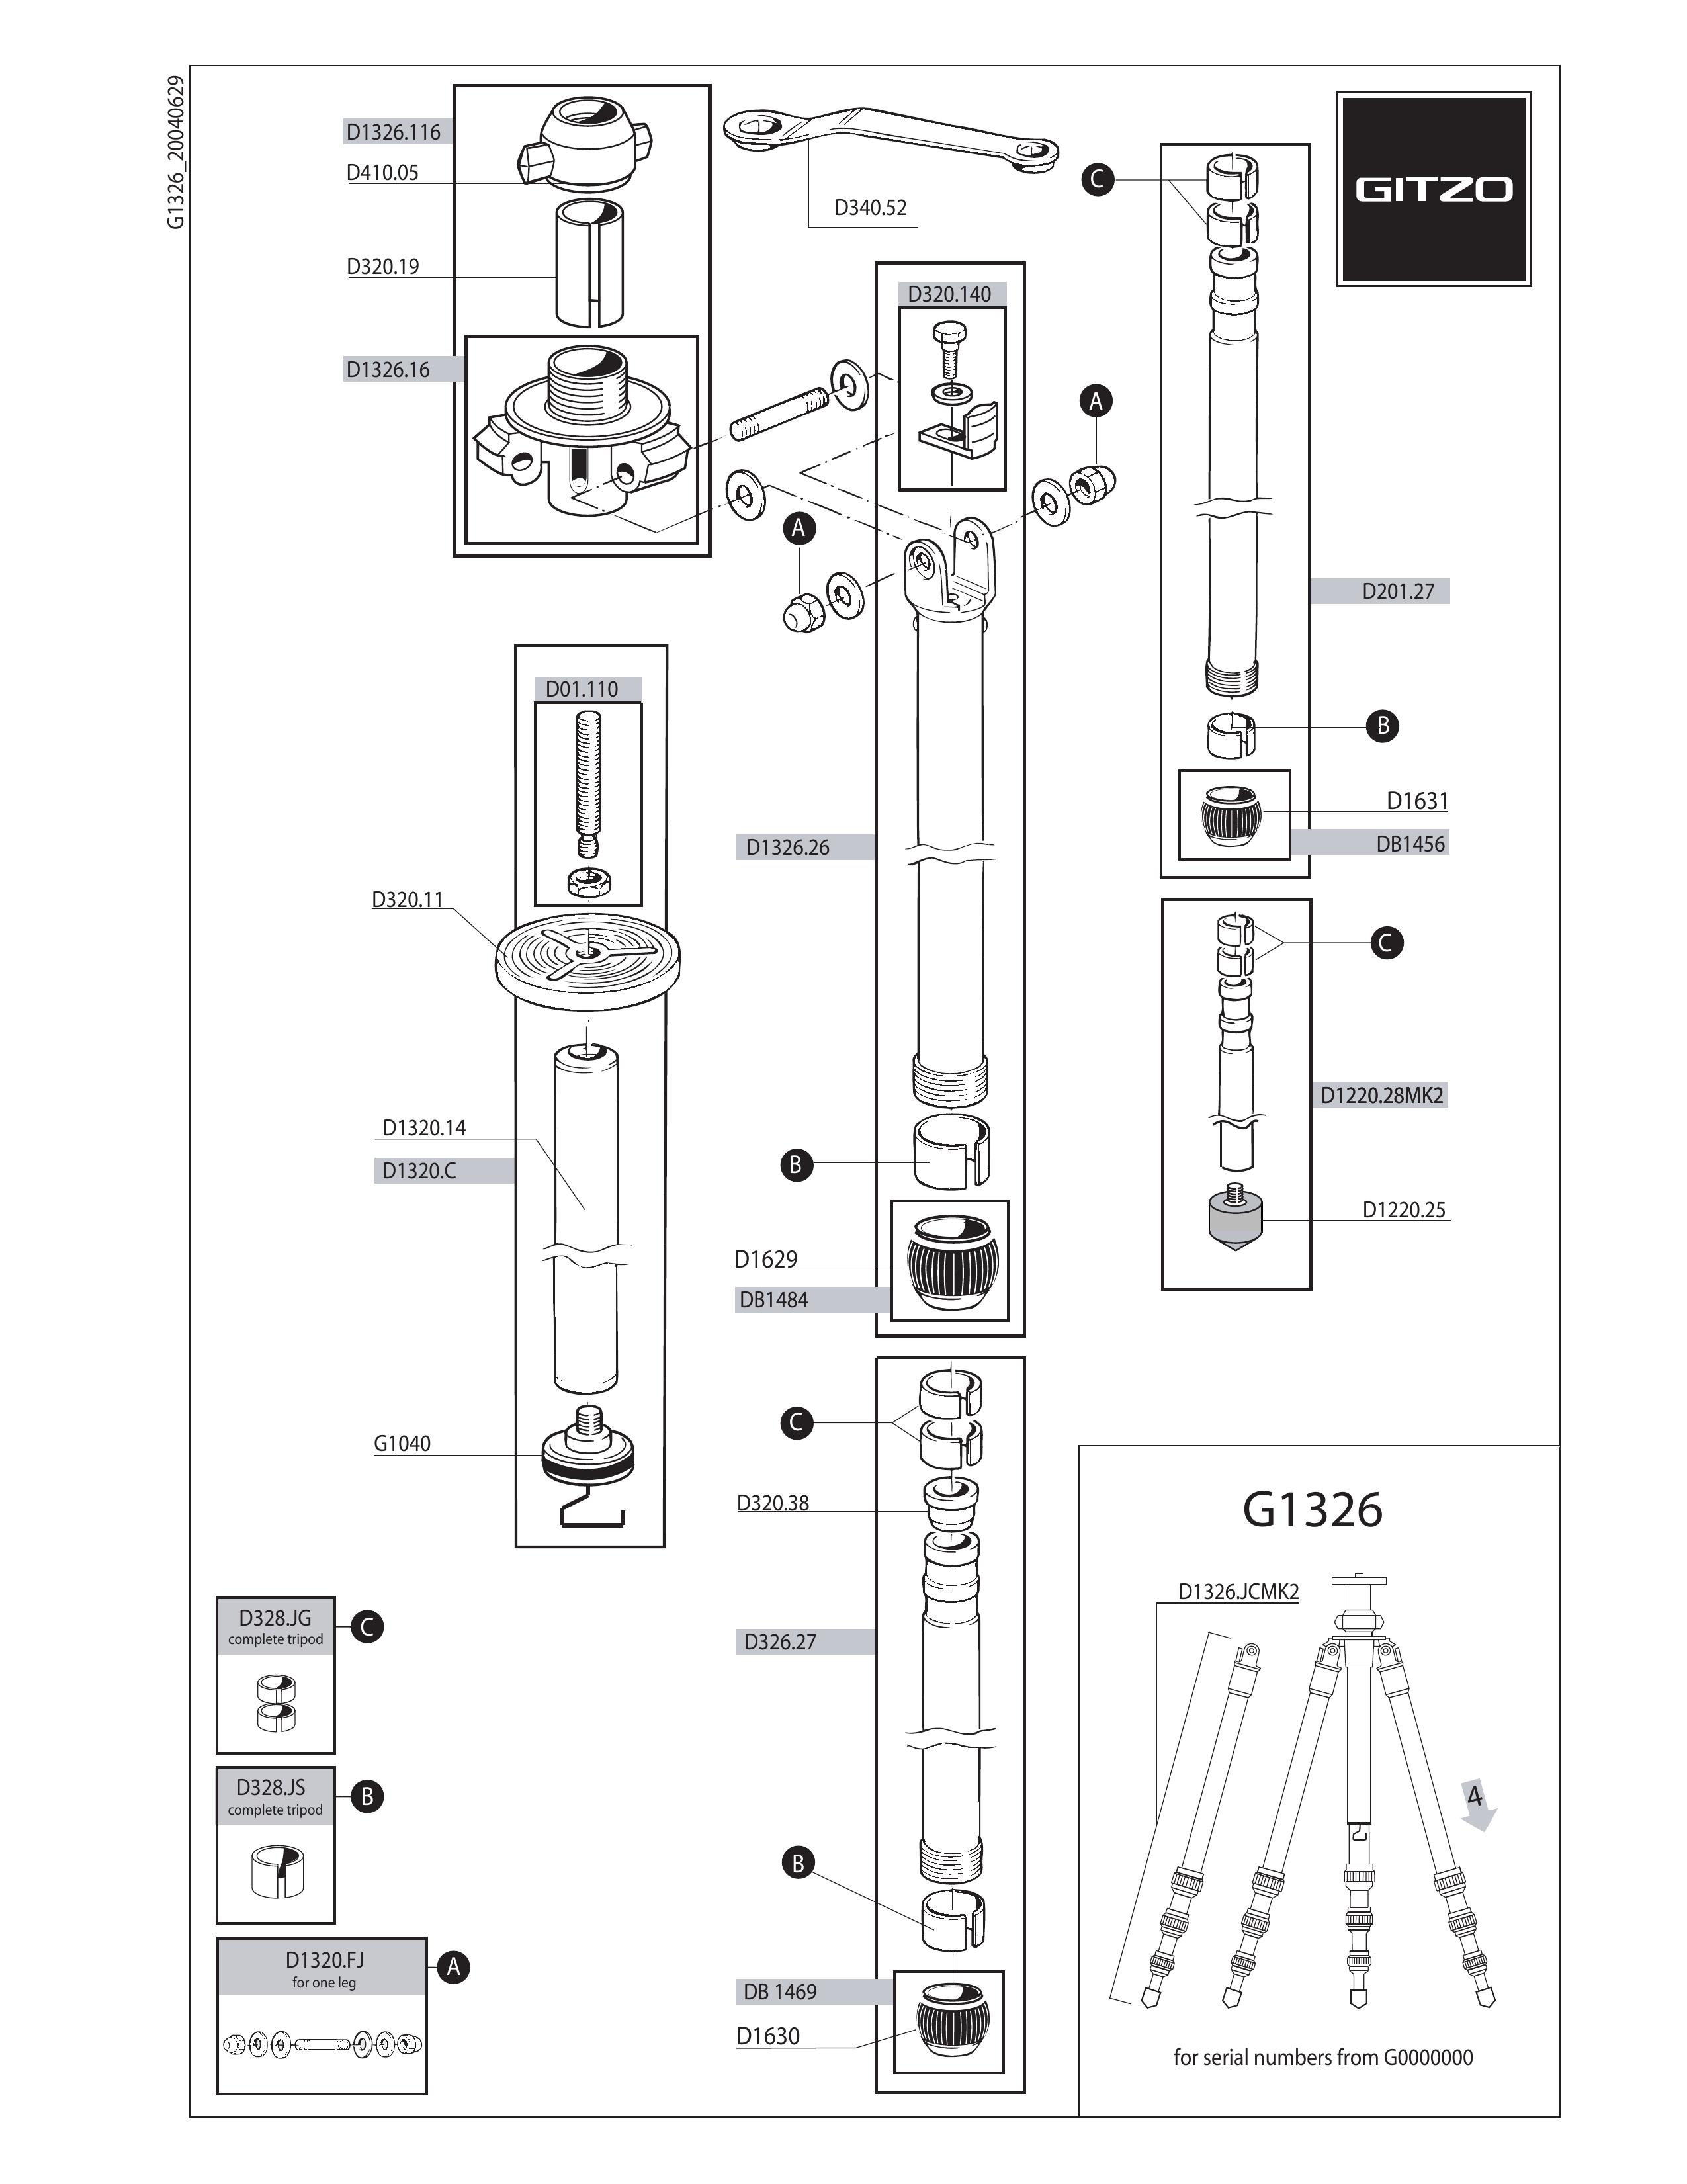 Gitzo G1326 Camcorder Accessories User Manual